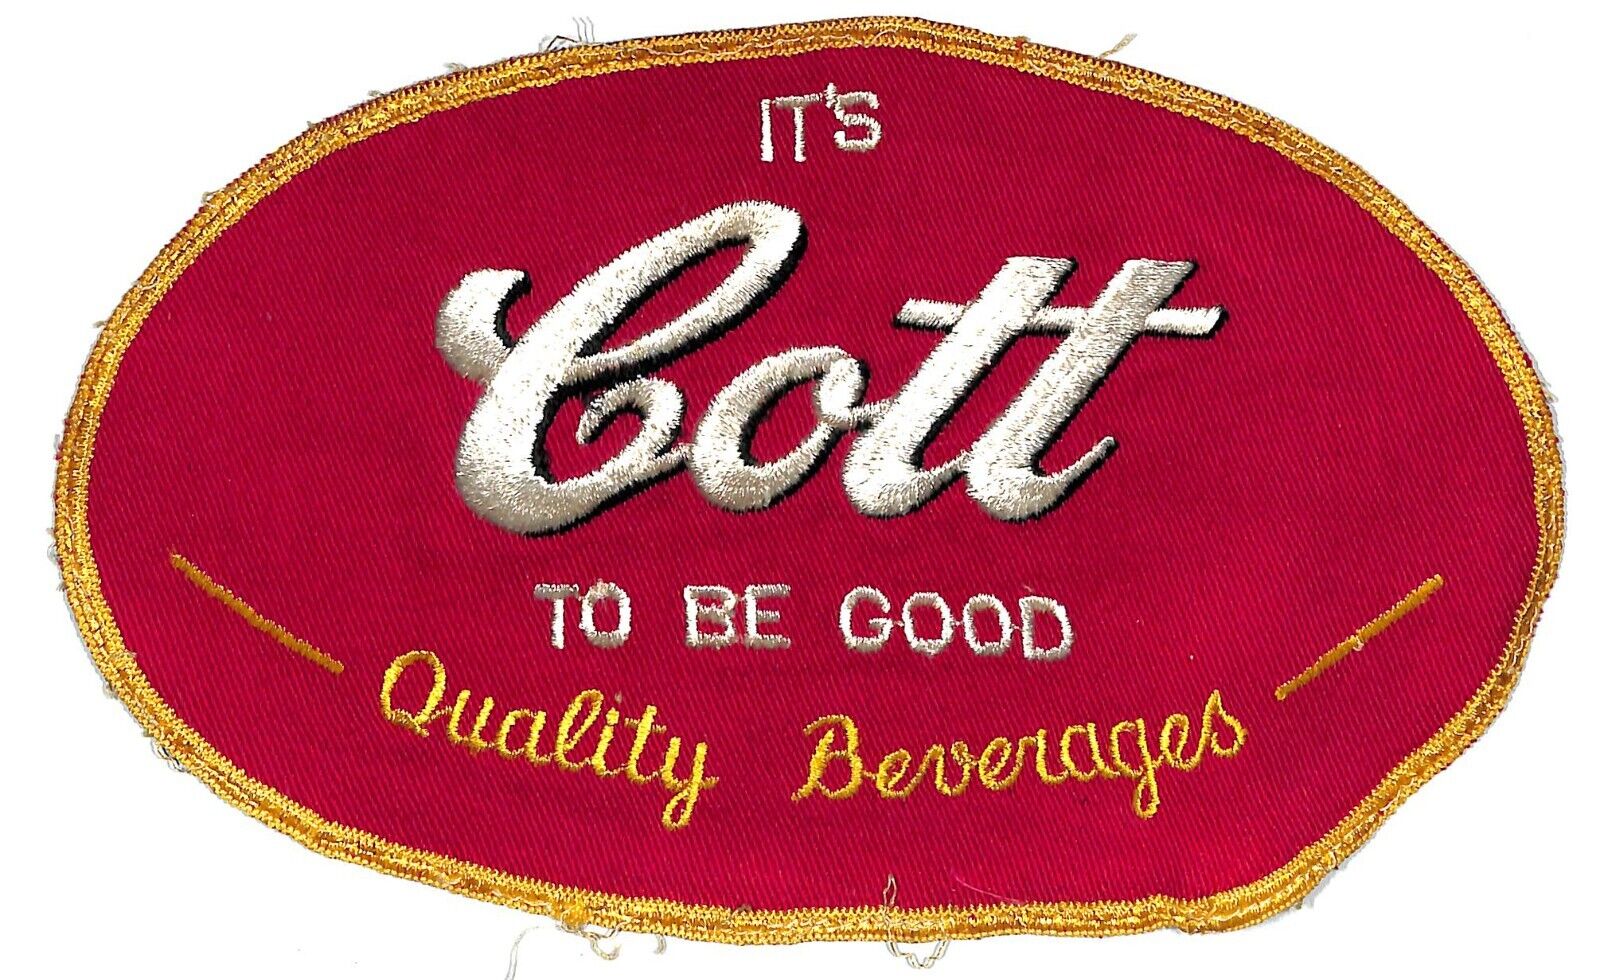 It's Cott To Be Good Large Embroidered Soda Patch c1950's-60's VGC - Very Scarce